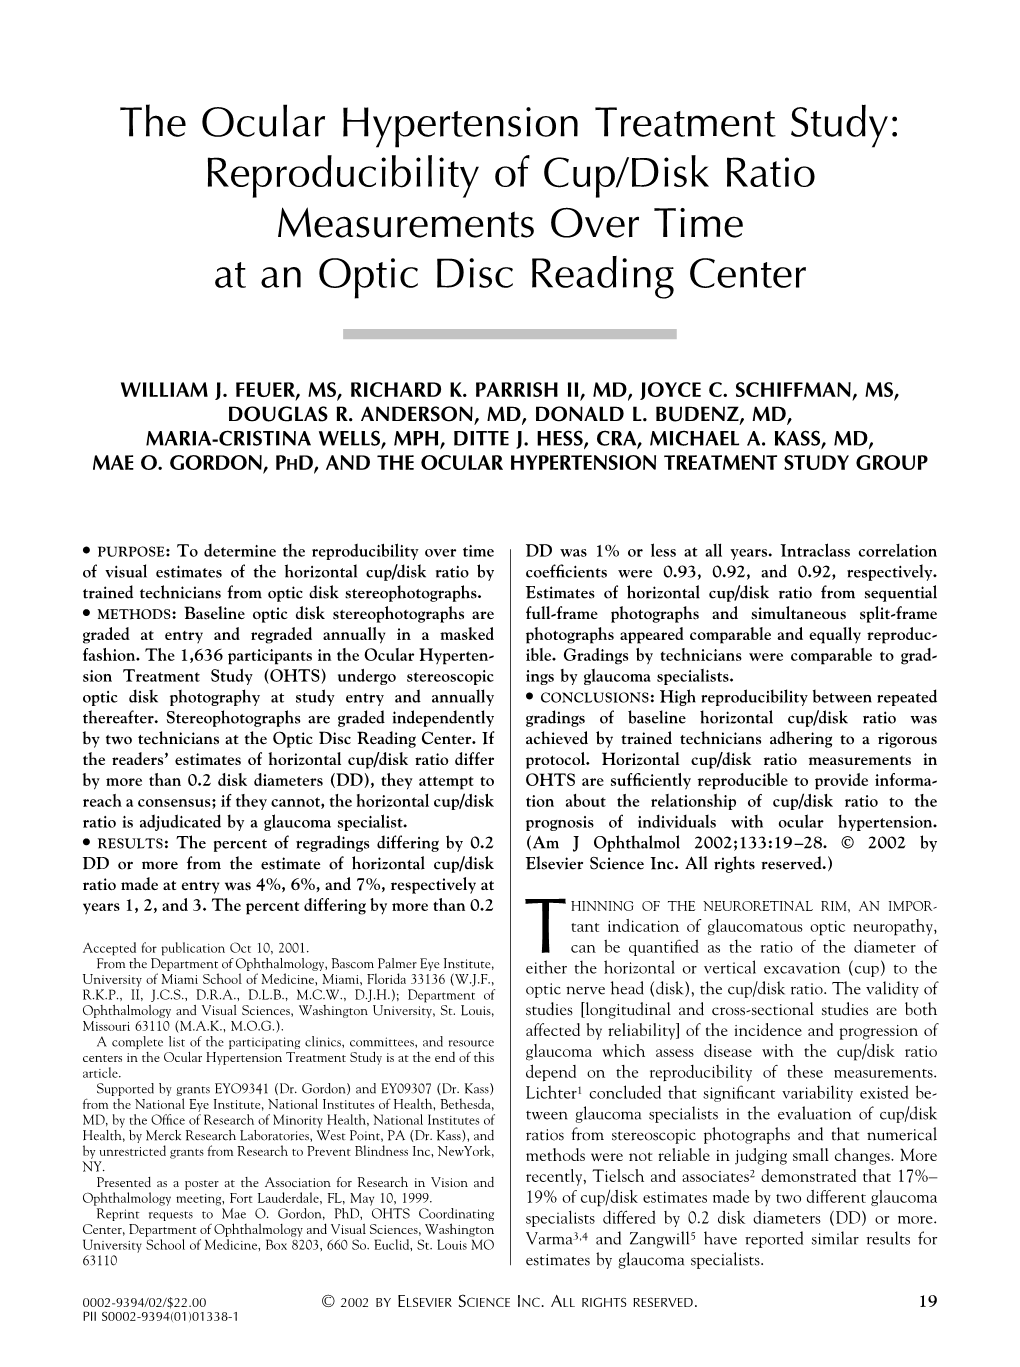 Reproducibility of Cup/Disk Ratio Measurements Over Time at an Optic Disc Reading Center